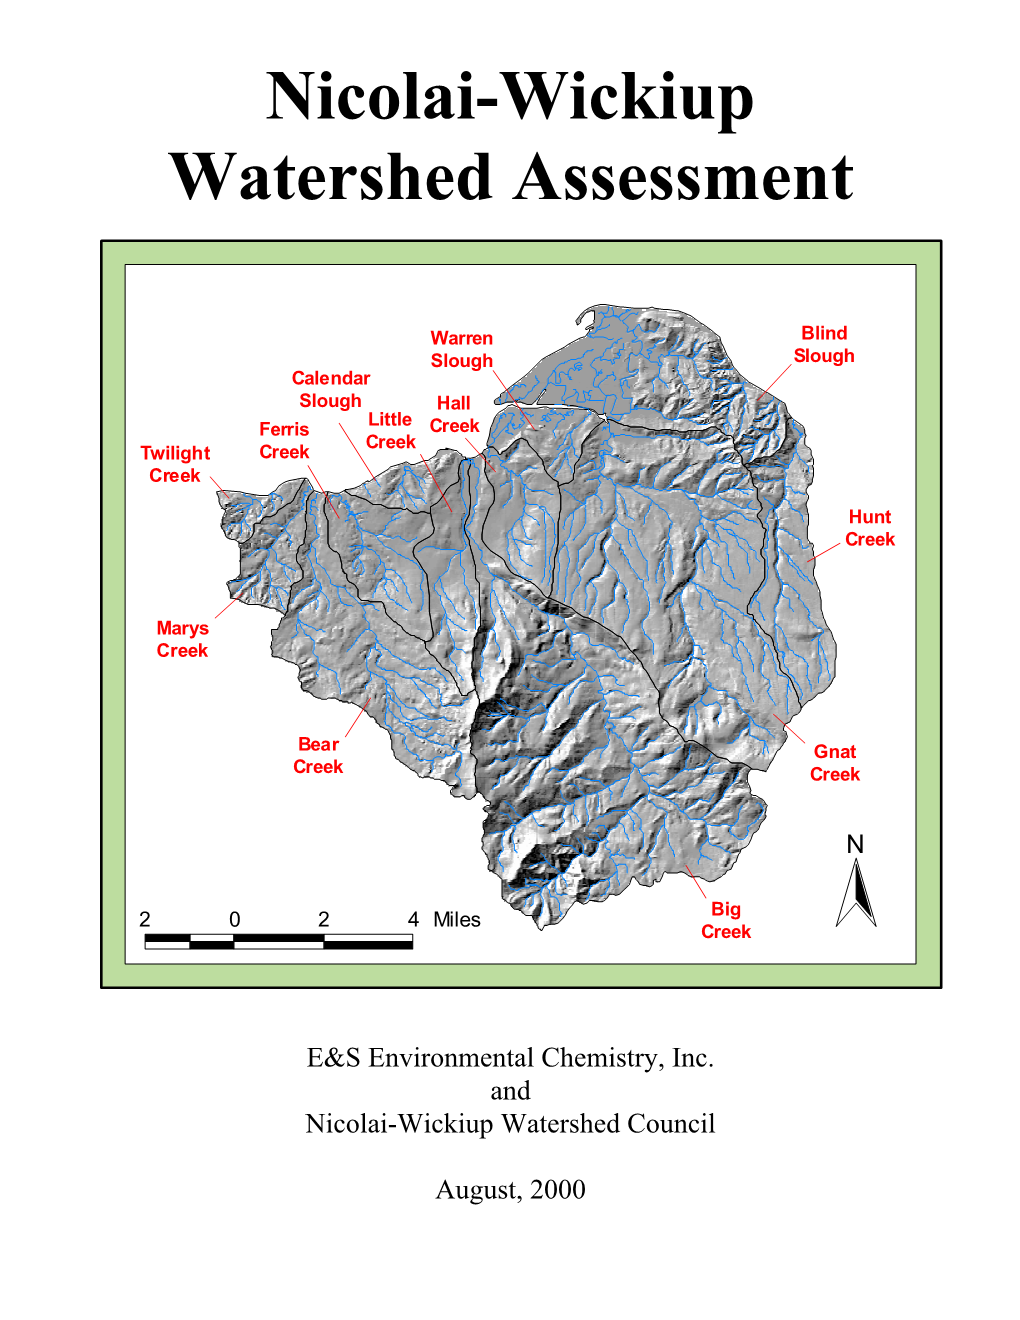 Nicolai-Wickiup Watershed Assessment